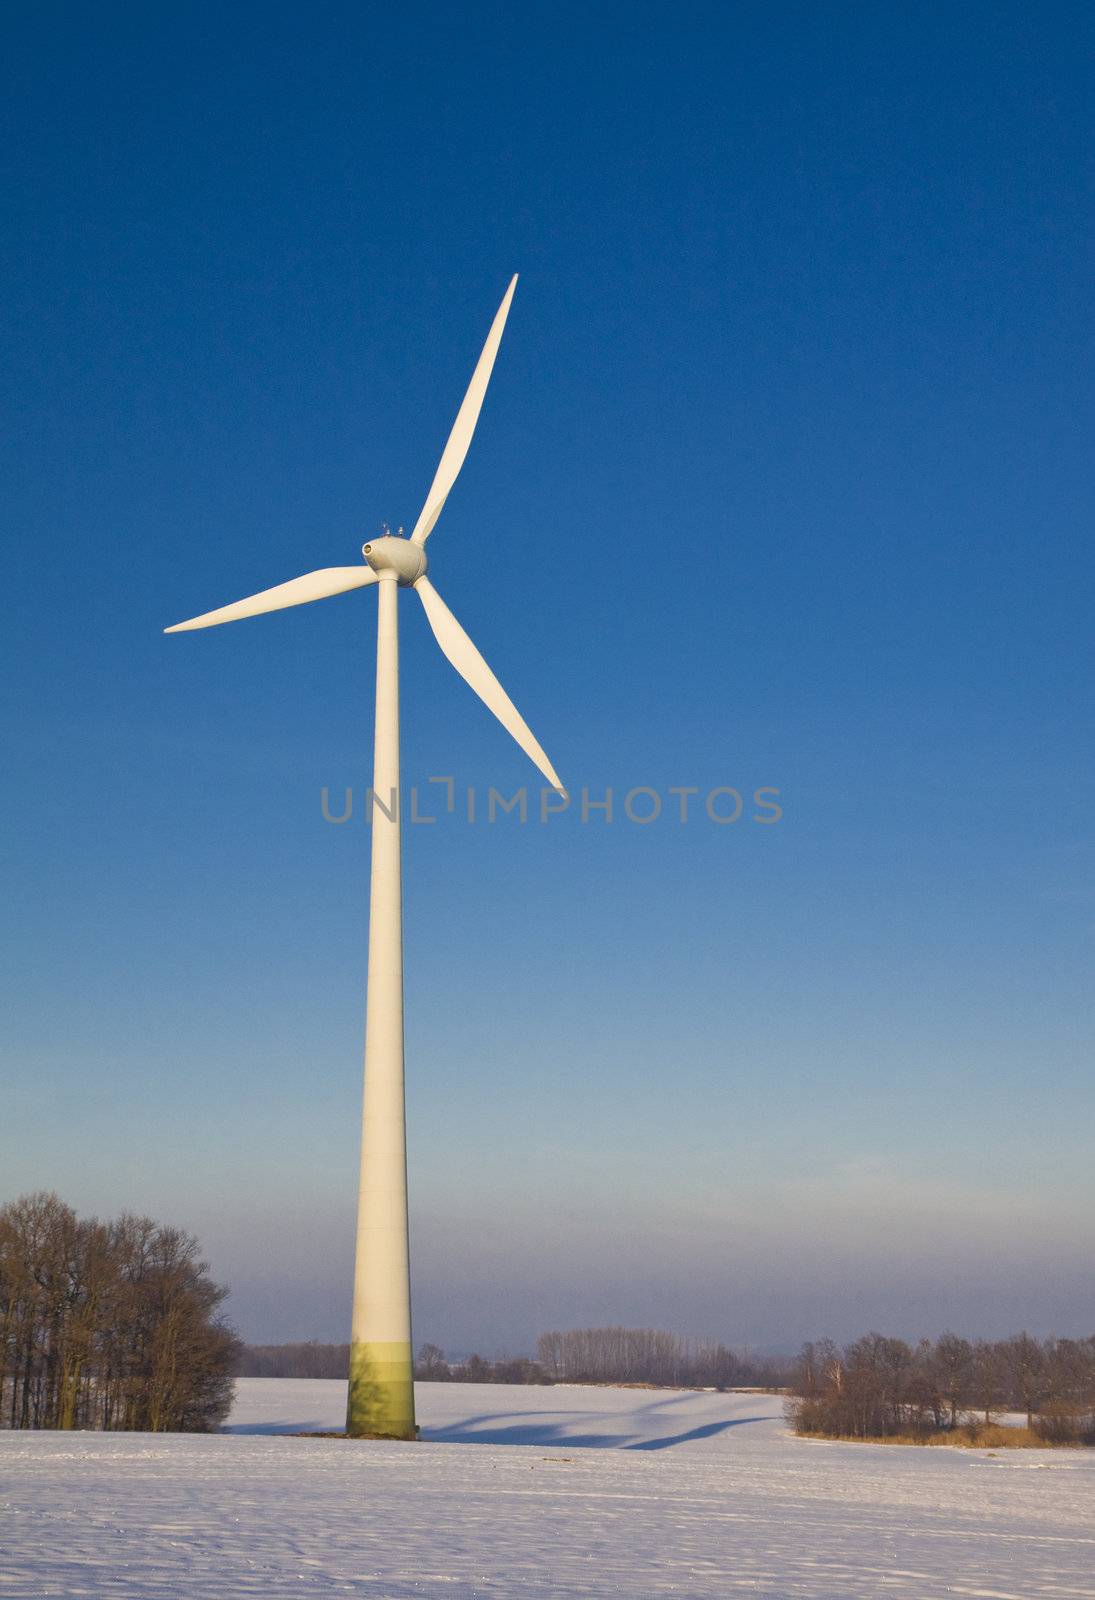 Windmill against a blue sky in winter, alternative energy source